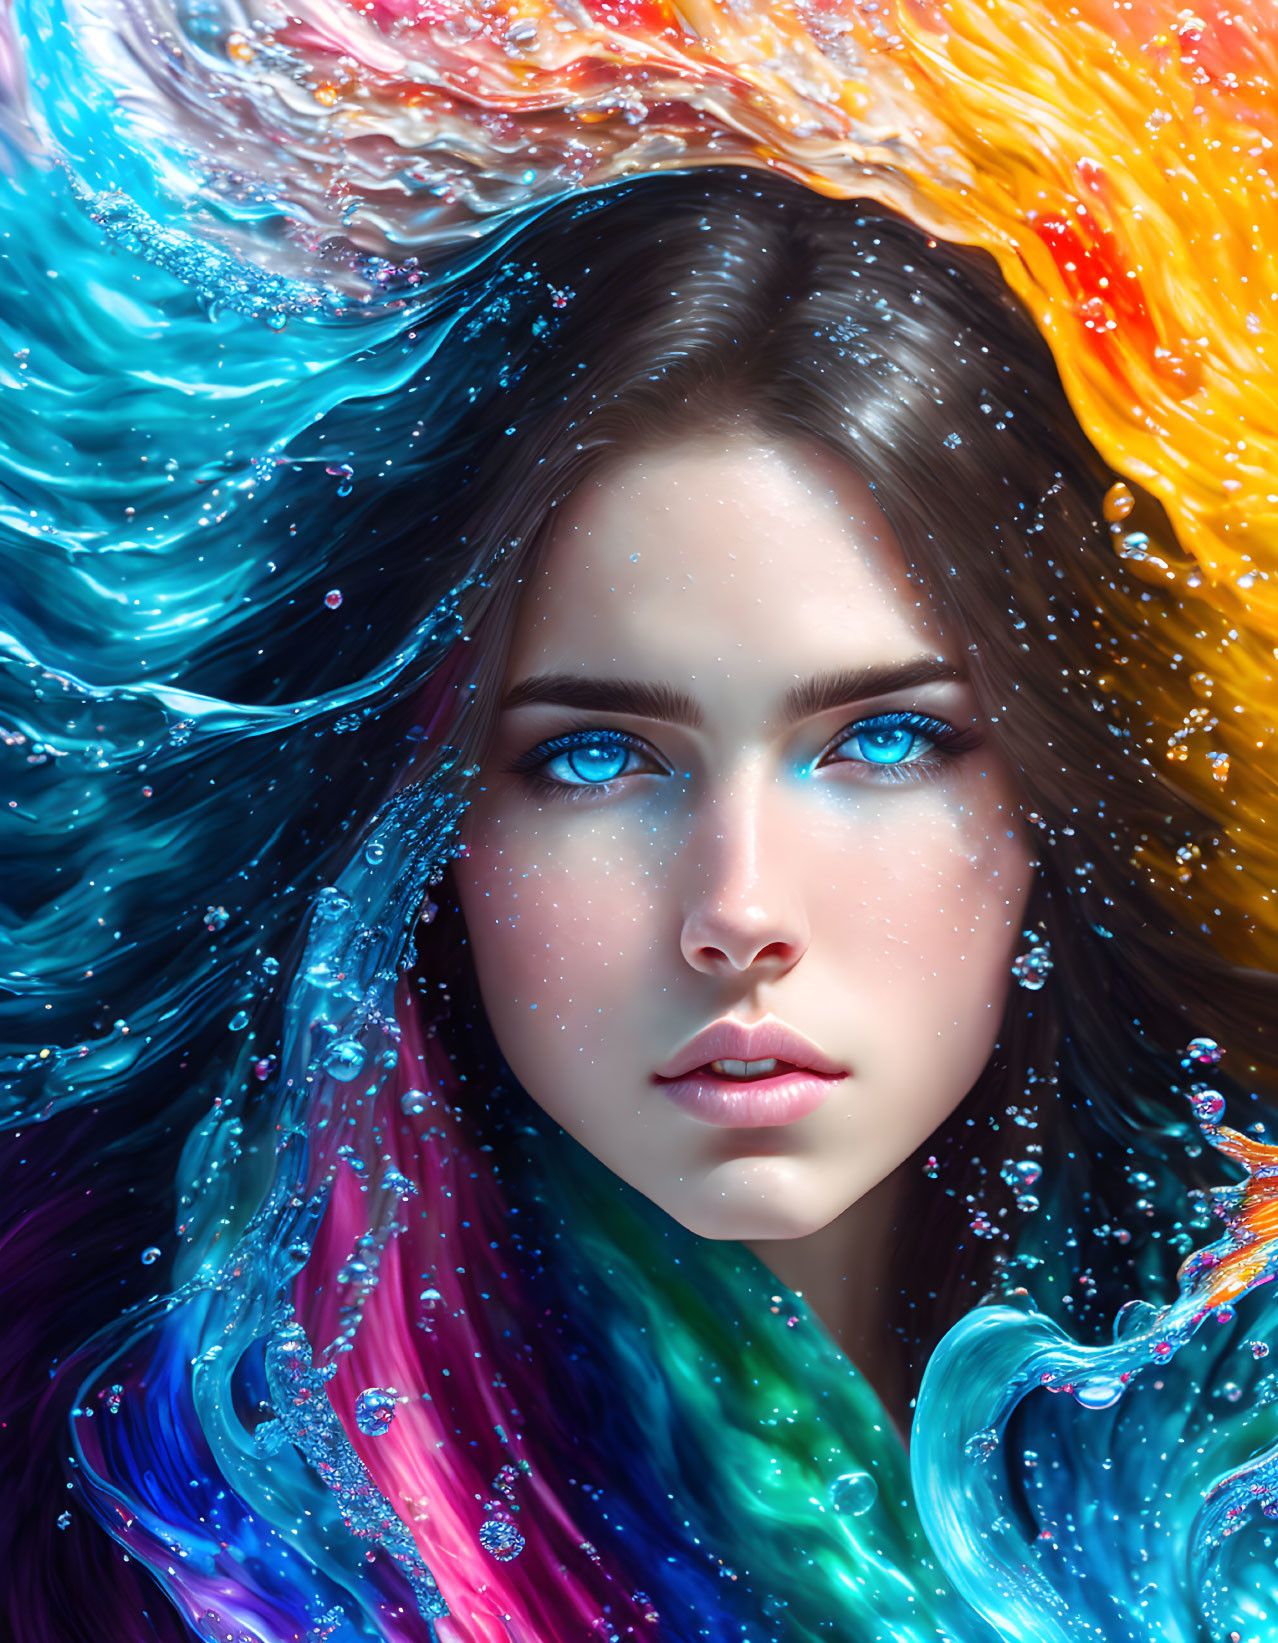 Vibrant portrait of a woman with blue eyes in swirling water-like colors